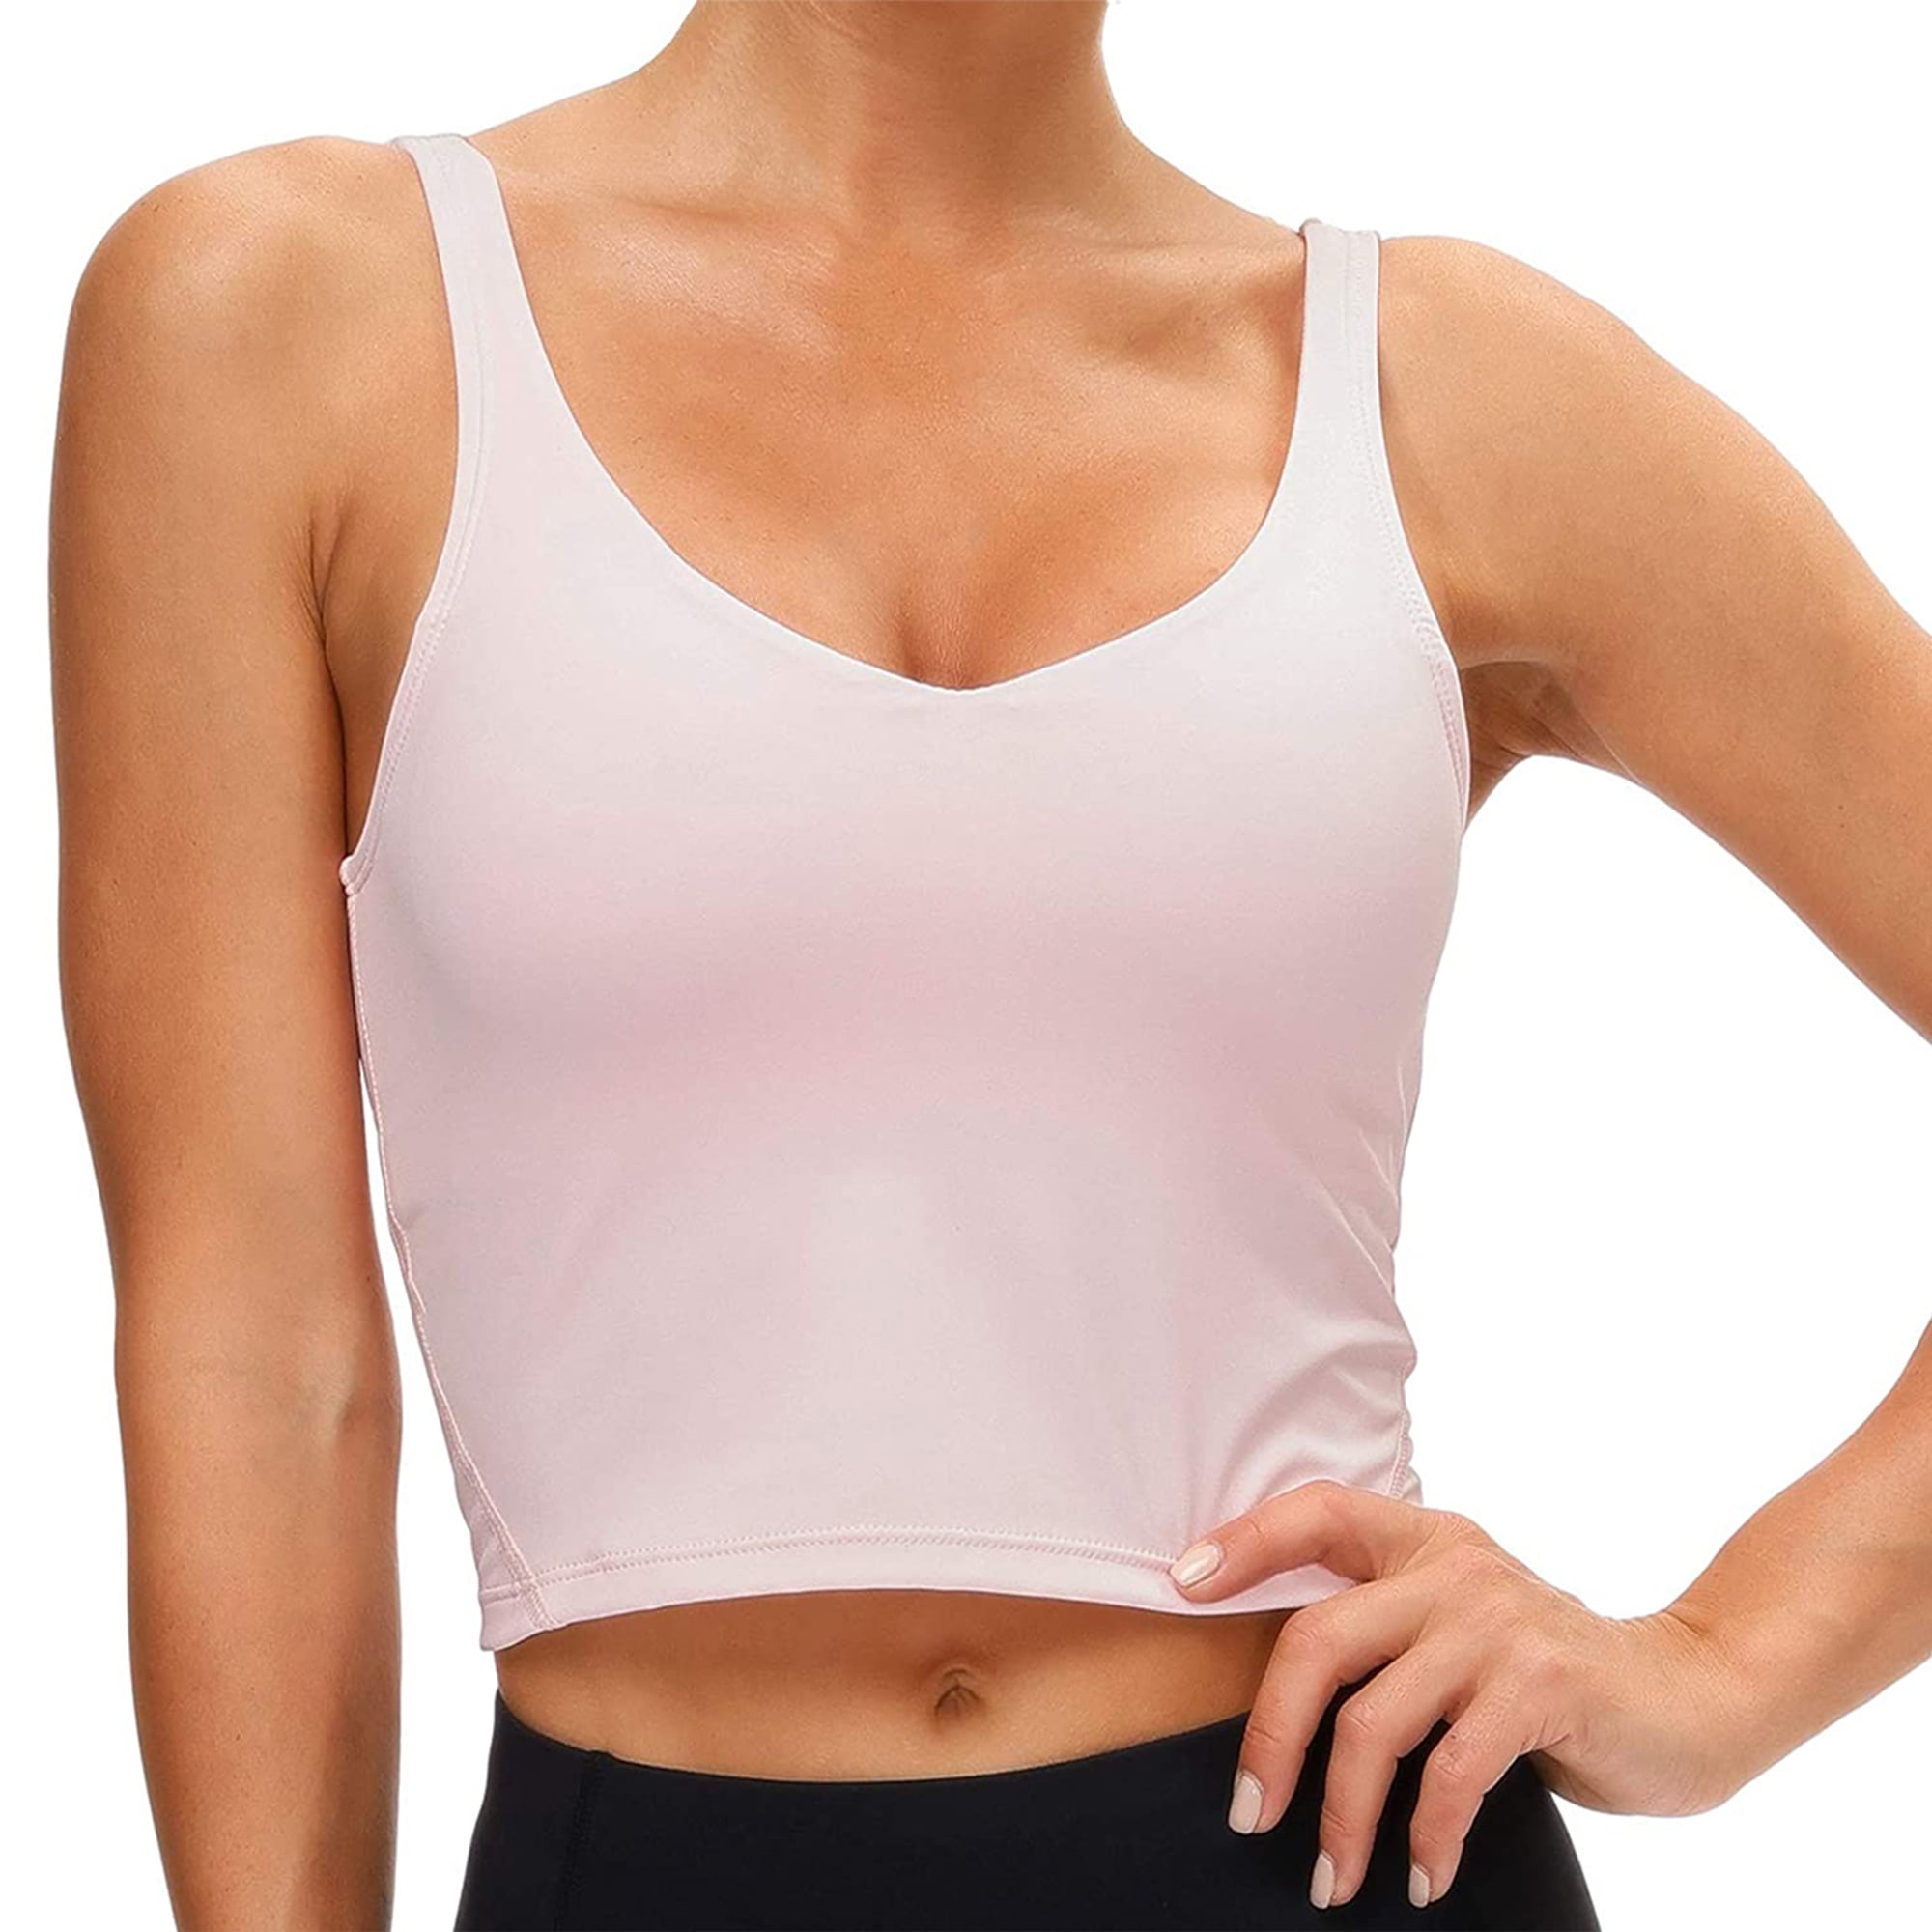 KerryKreey Womens Halter Workout Tops Support Padded Longline